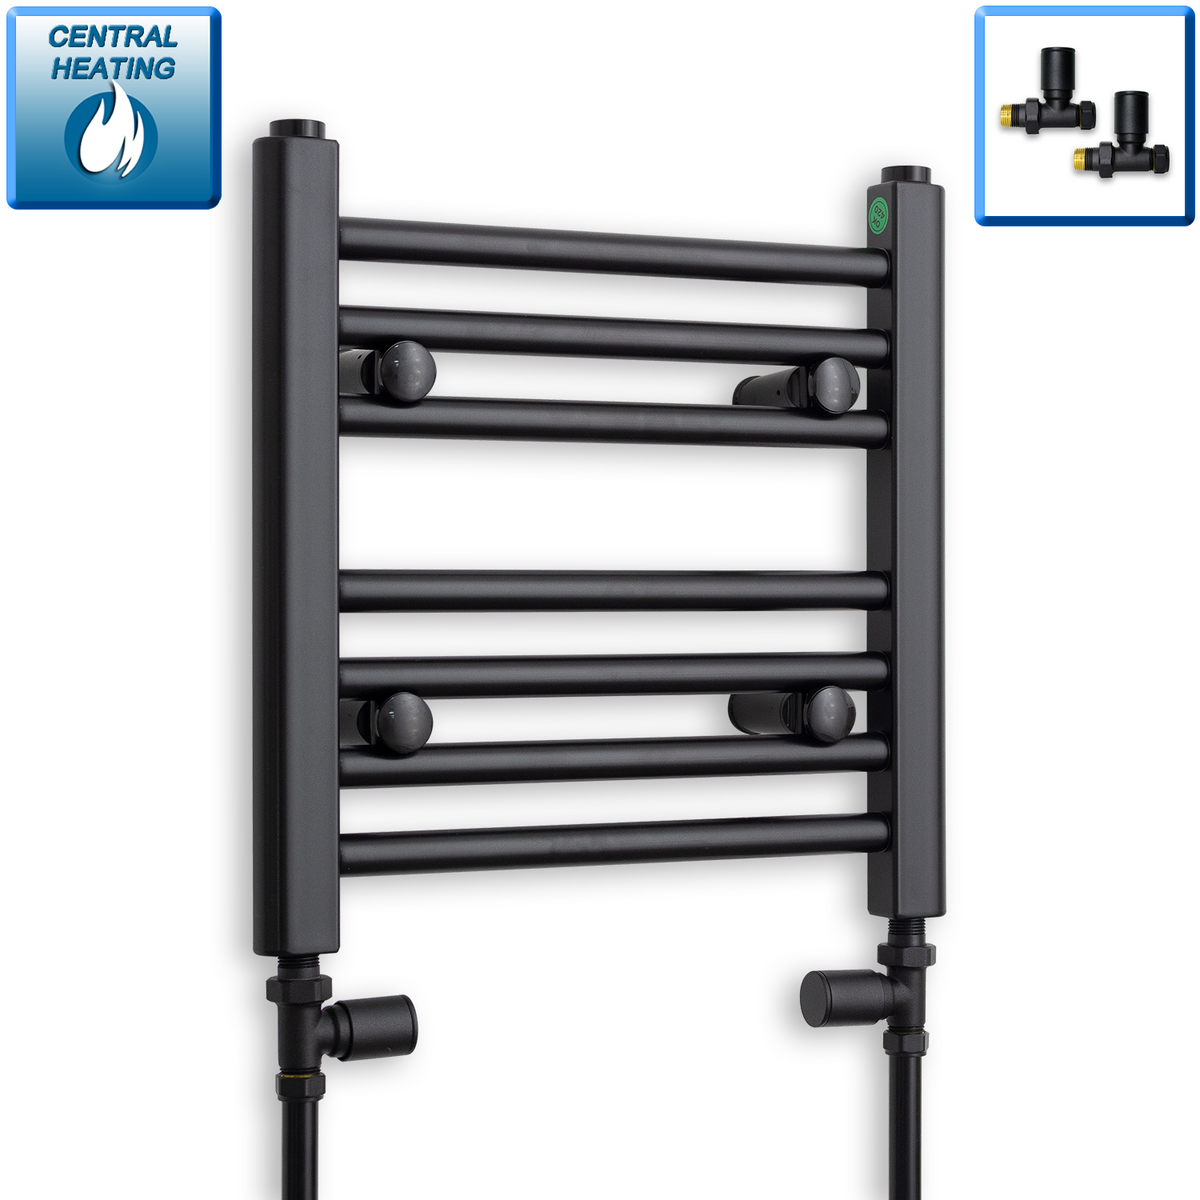 400 mm High x 400 mm Wide Flat Black Heated Towel Radiator central heating